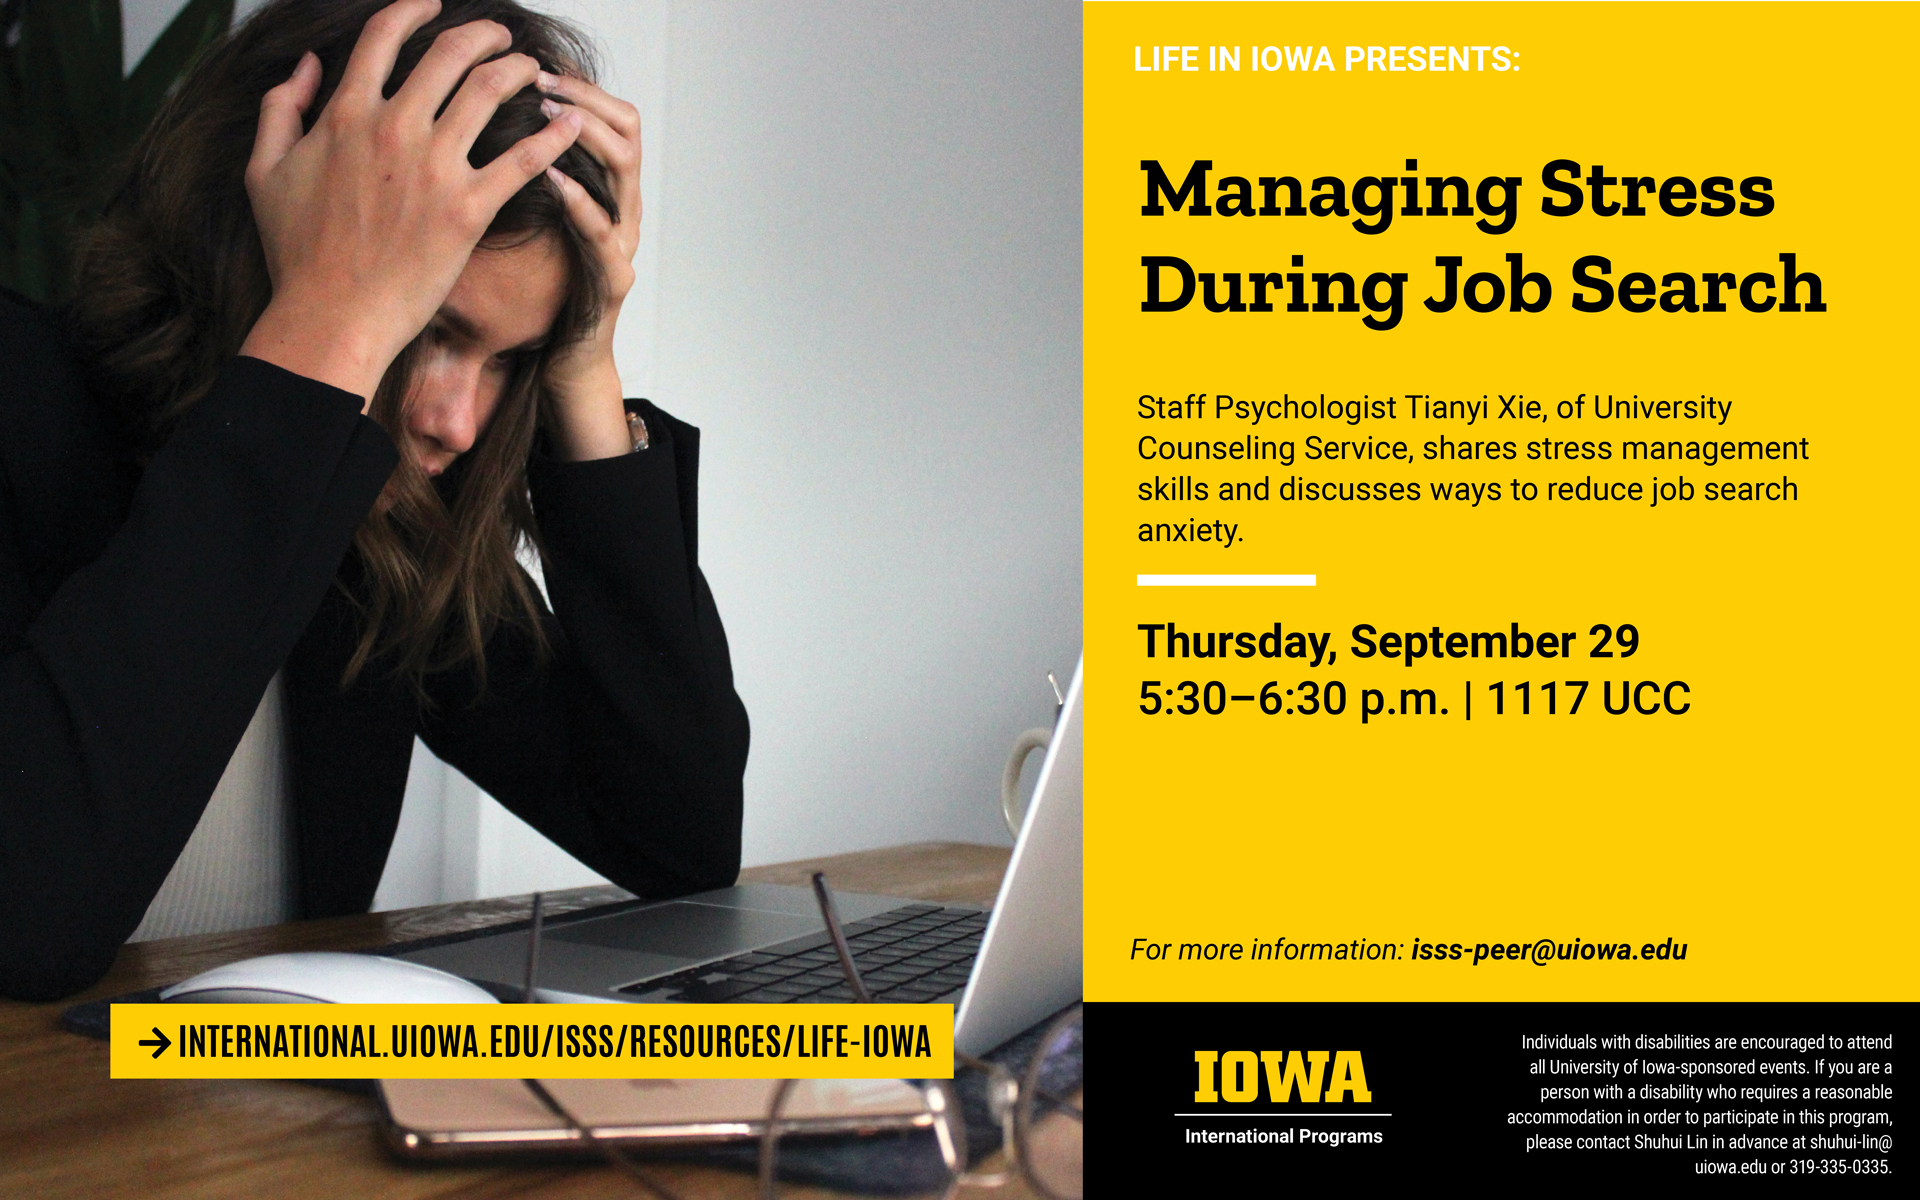 Picture on left side of slide shows woman with head in her hands, looking at a computer. Life in Iowa presents: Managing Stress During Job Search. Staff Psychologist Tianyi, of University Counseling Service, shares stress management skills and discusses ways to reduce job search anxiety. Thursday, September 29, 5:30 -6:30 pm, in room 1117 UCC. For more information, email isss-peer@uiowa.edu. Individuals with disabilities are encouraged to attend all University of Iowa-sponsored events. If you are a person with a disability who requires a reasonable accommodation in order to participate in this program, please contact Shuhui Lin in advance at shuhui-lin@uiowa.edu or 319-335-0335. 